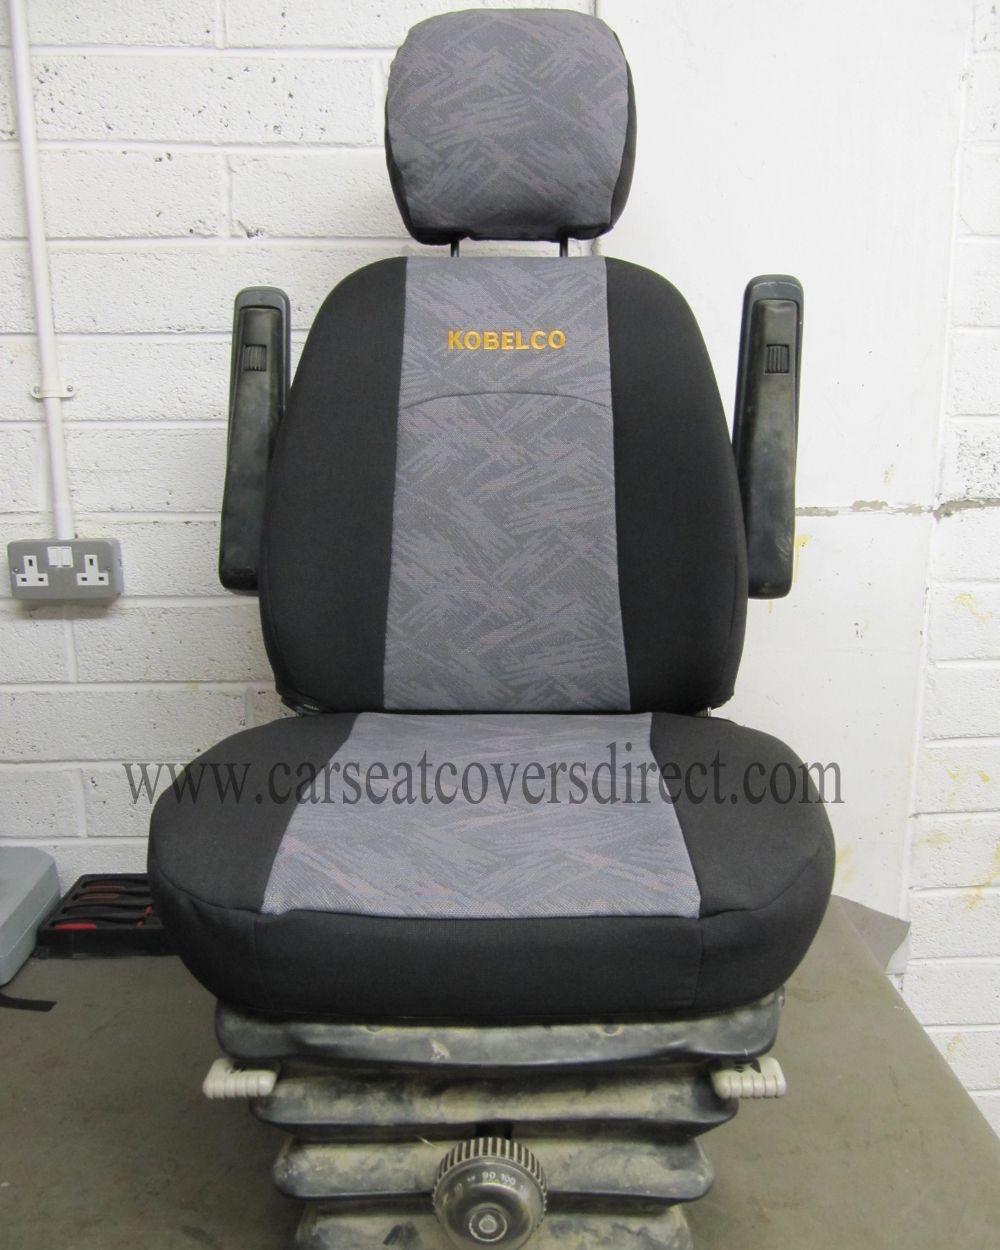 Mercedes Benz M Class Seat Covers - Rear passenger seat folded